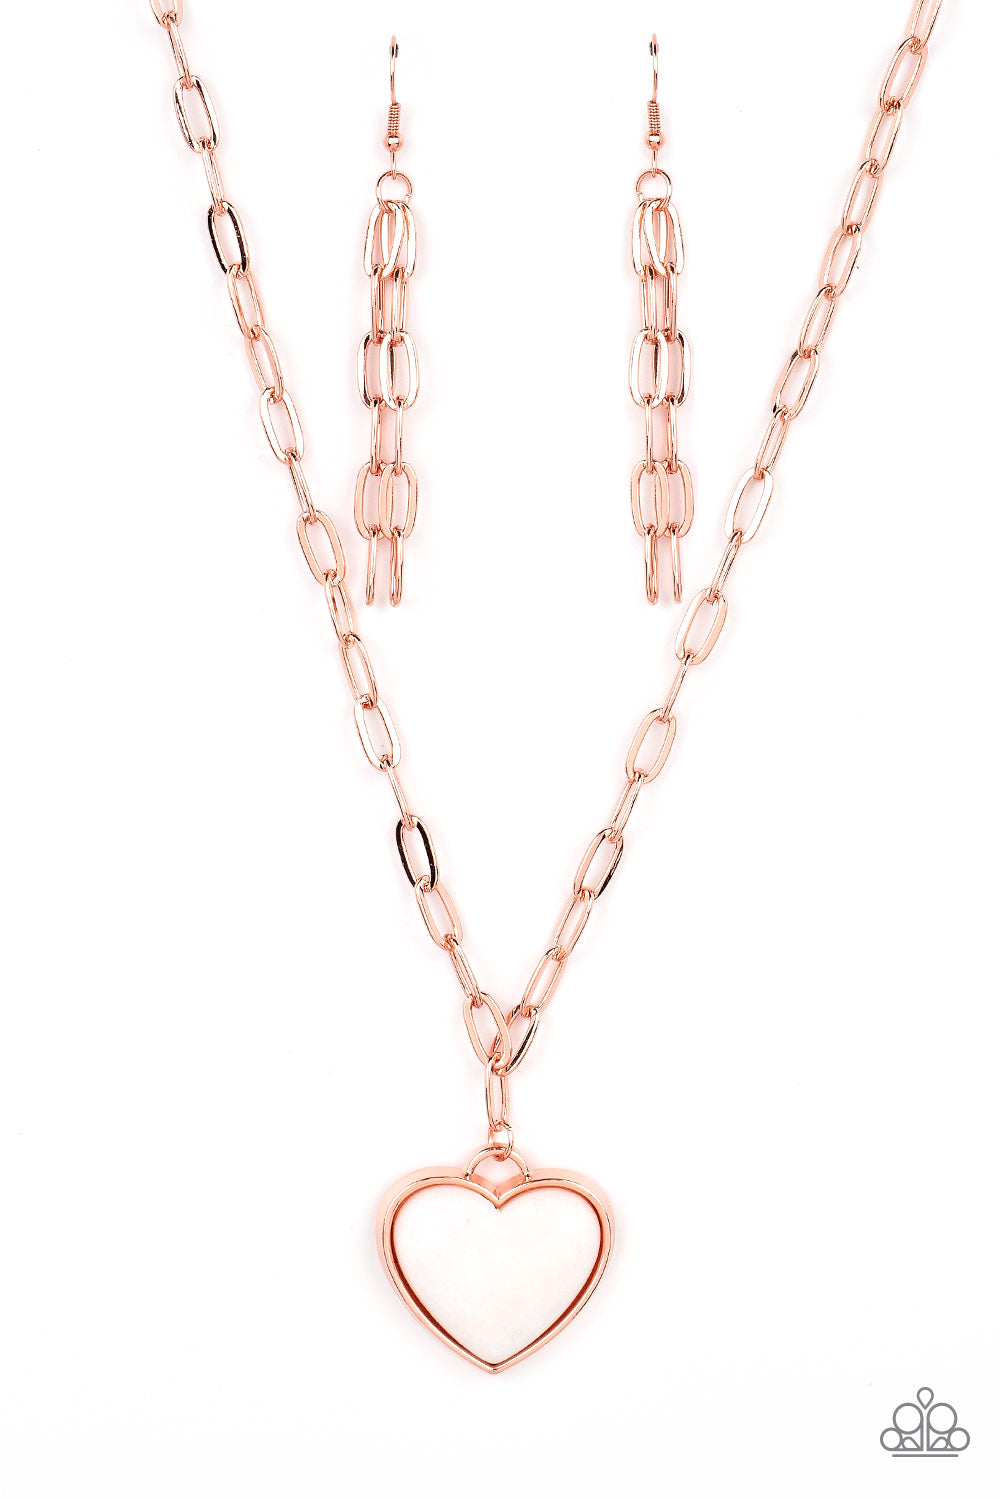 Everlasting Endearment Necklace ( Pink, Copper, White)